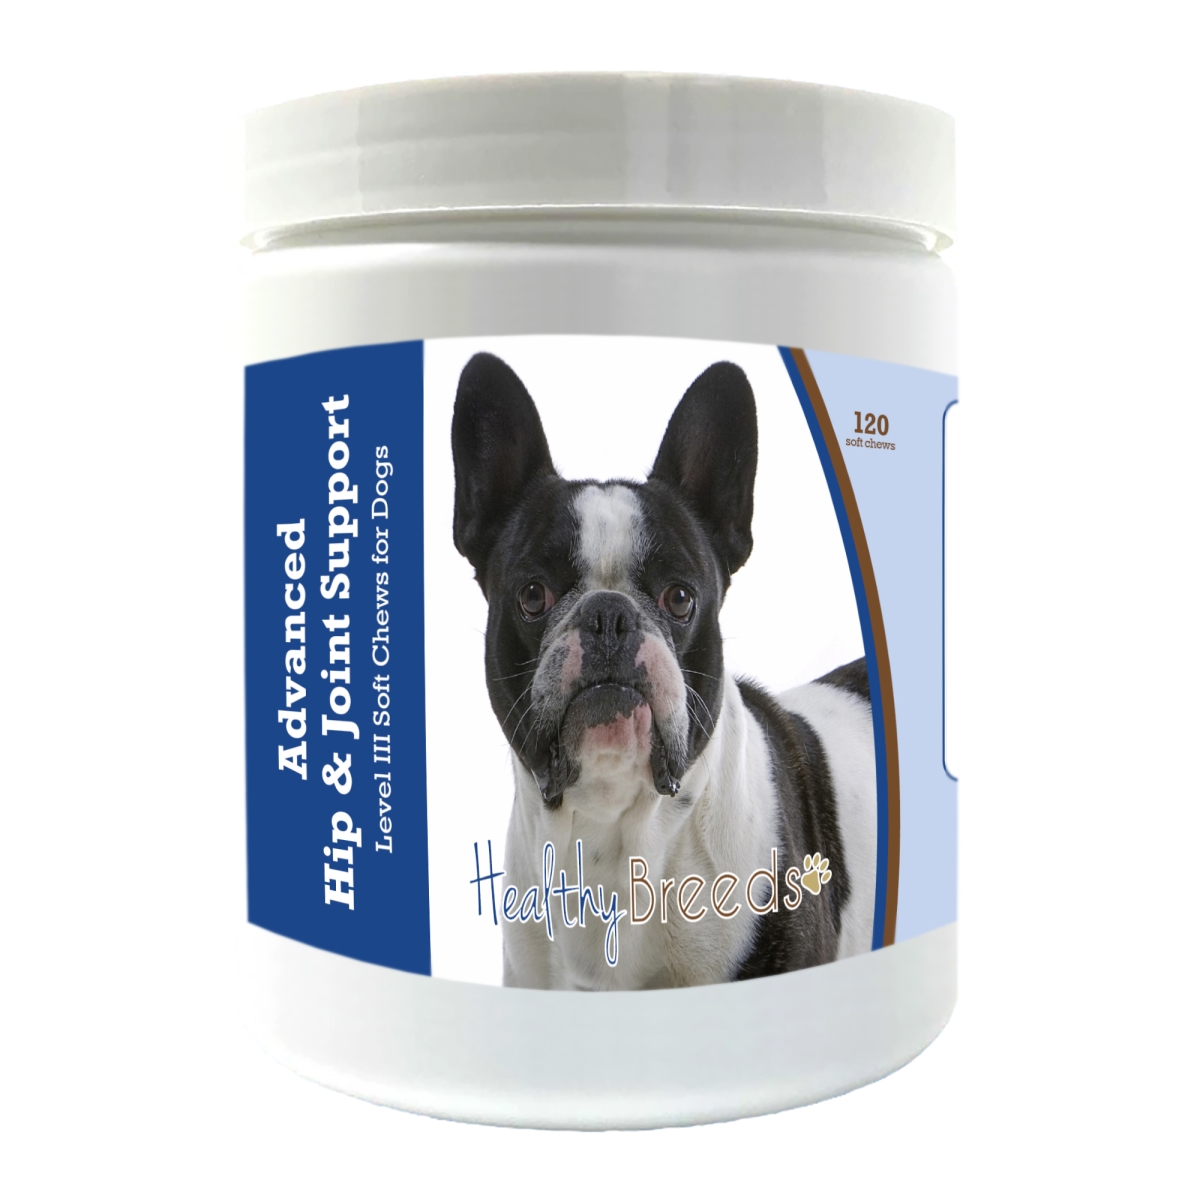 Picture of Healthy Breeds 192959898279 French Bulldog Advanced Hip & Joint Support Level III Soft Chews for Dogs